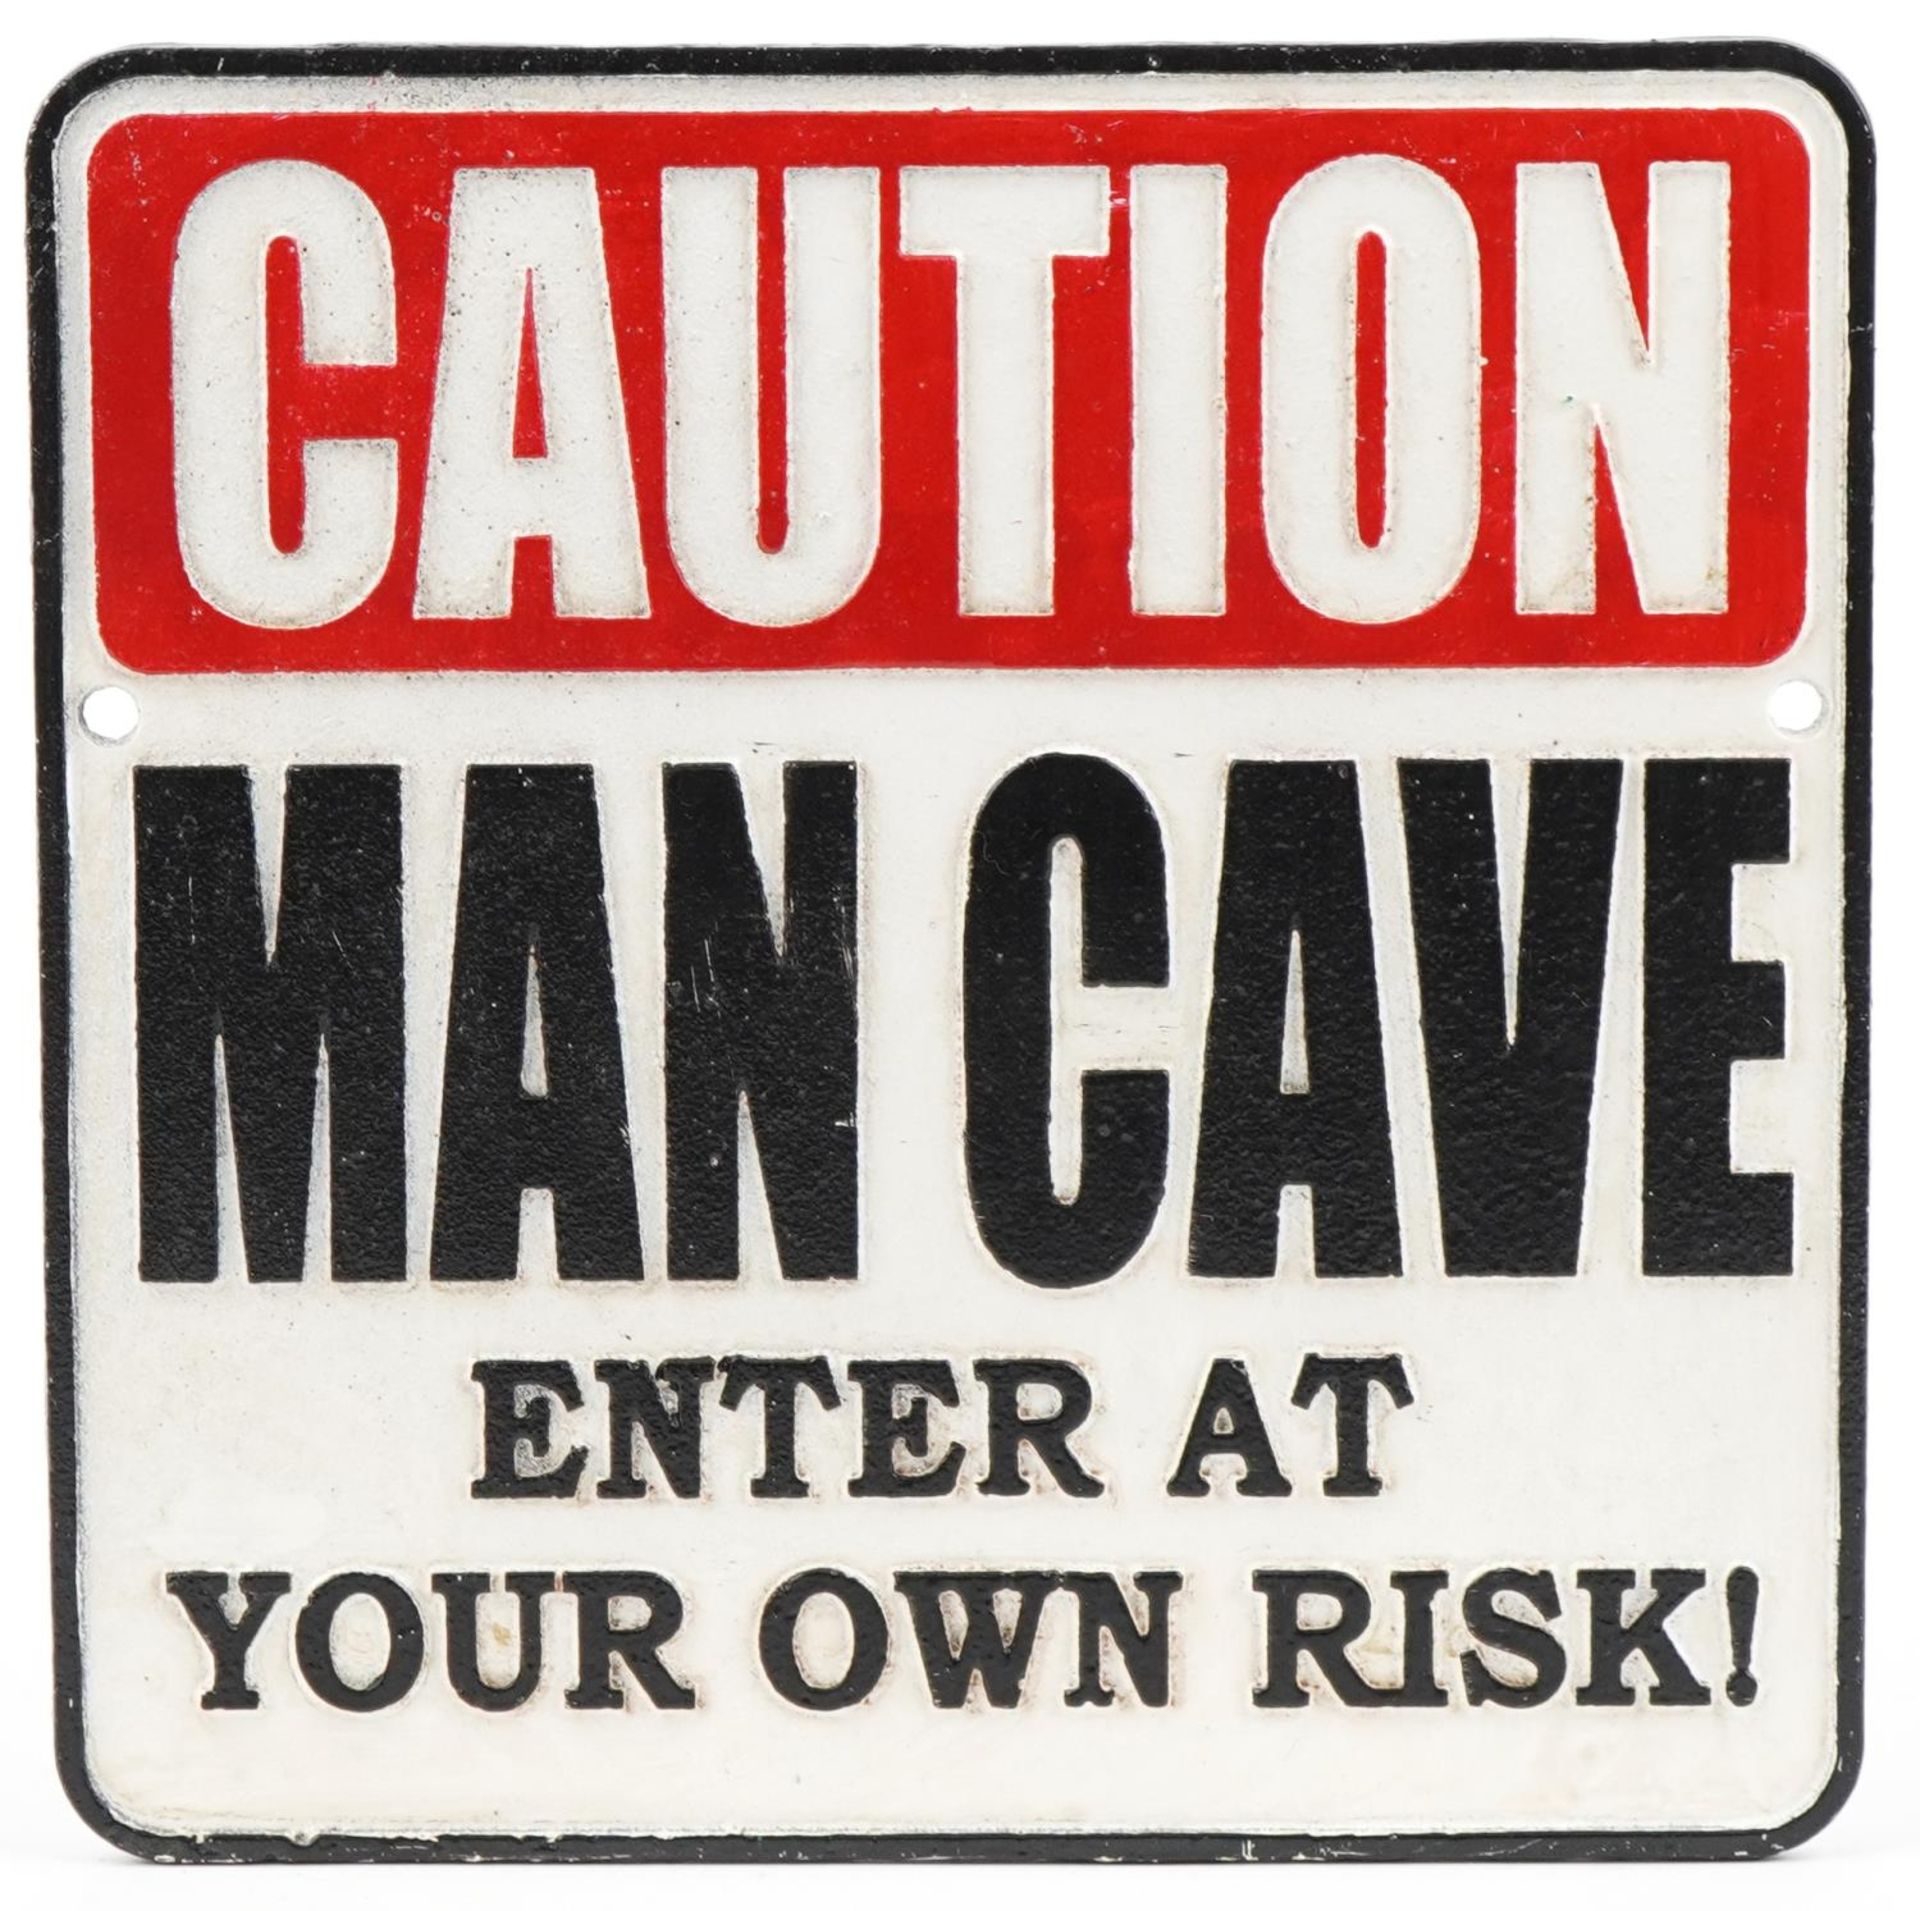 Caution, Man Cave, Enter at Your Own Risk! painted cast iron sign, 24.5cm x 24.5cm : For further